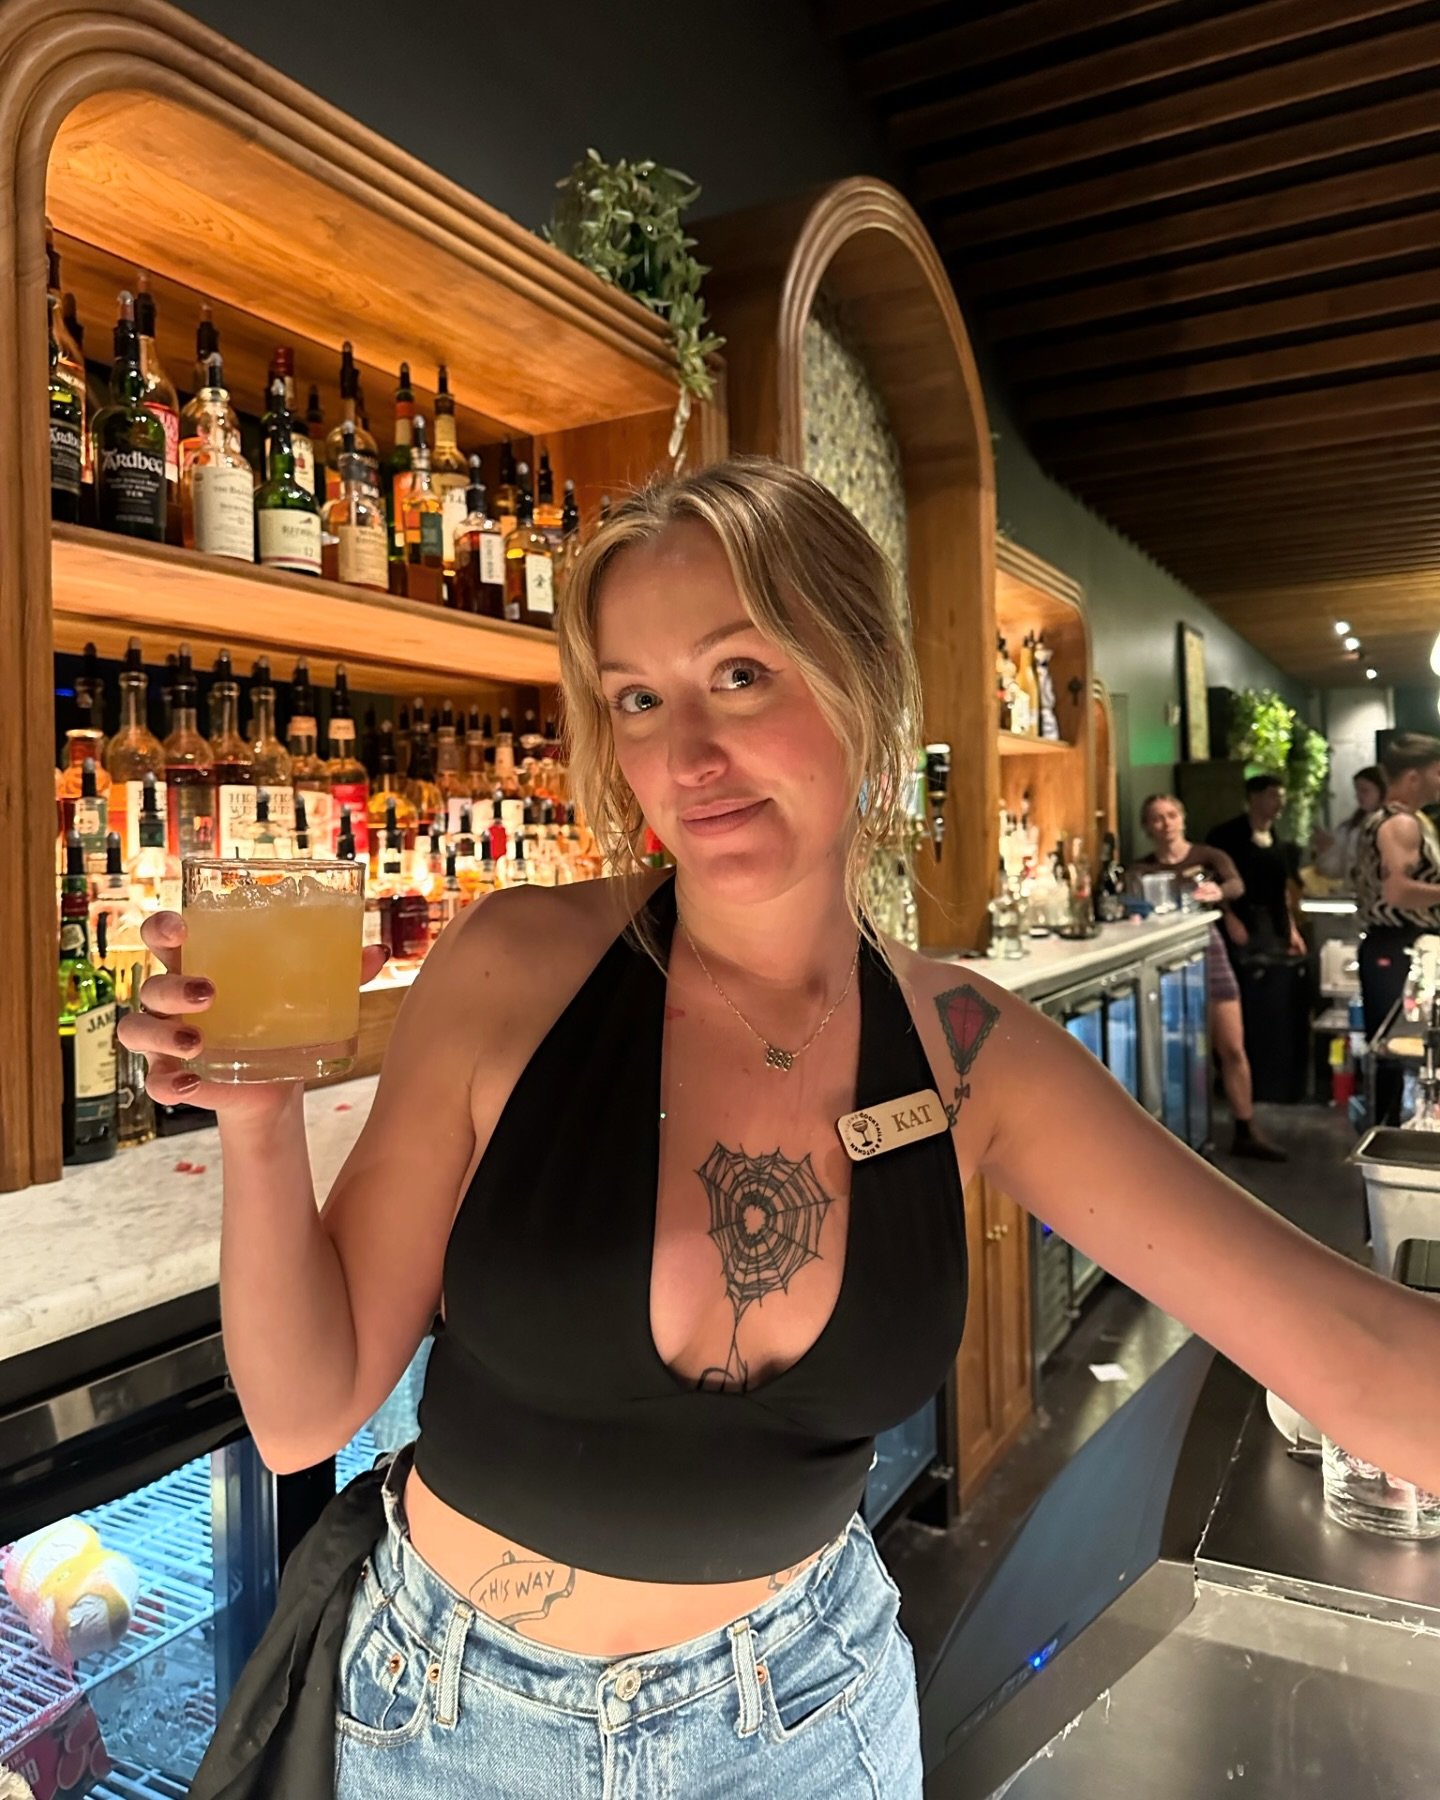 Wednesdays are our Mondays at Citizens, come have a little bit of fun with us 🍸 We have a Pickle Martini on special for the week and other delicious cocktails and bites for you to enjoy 😋